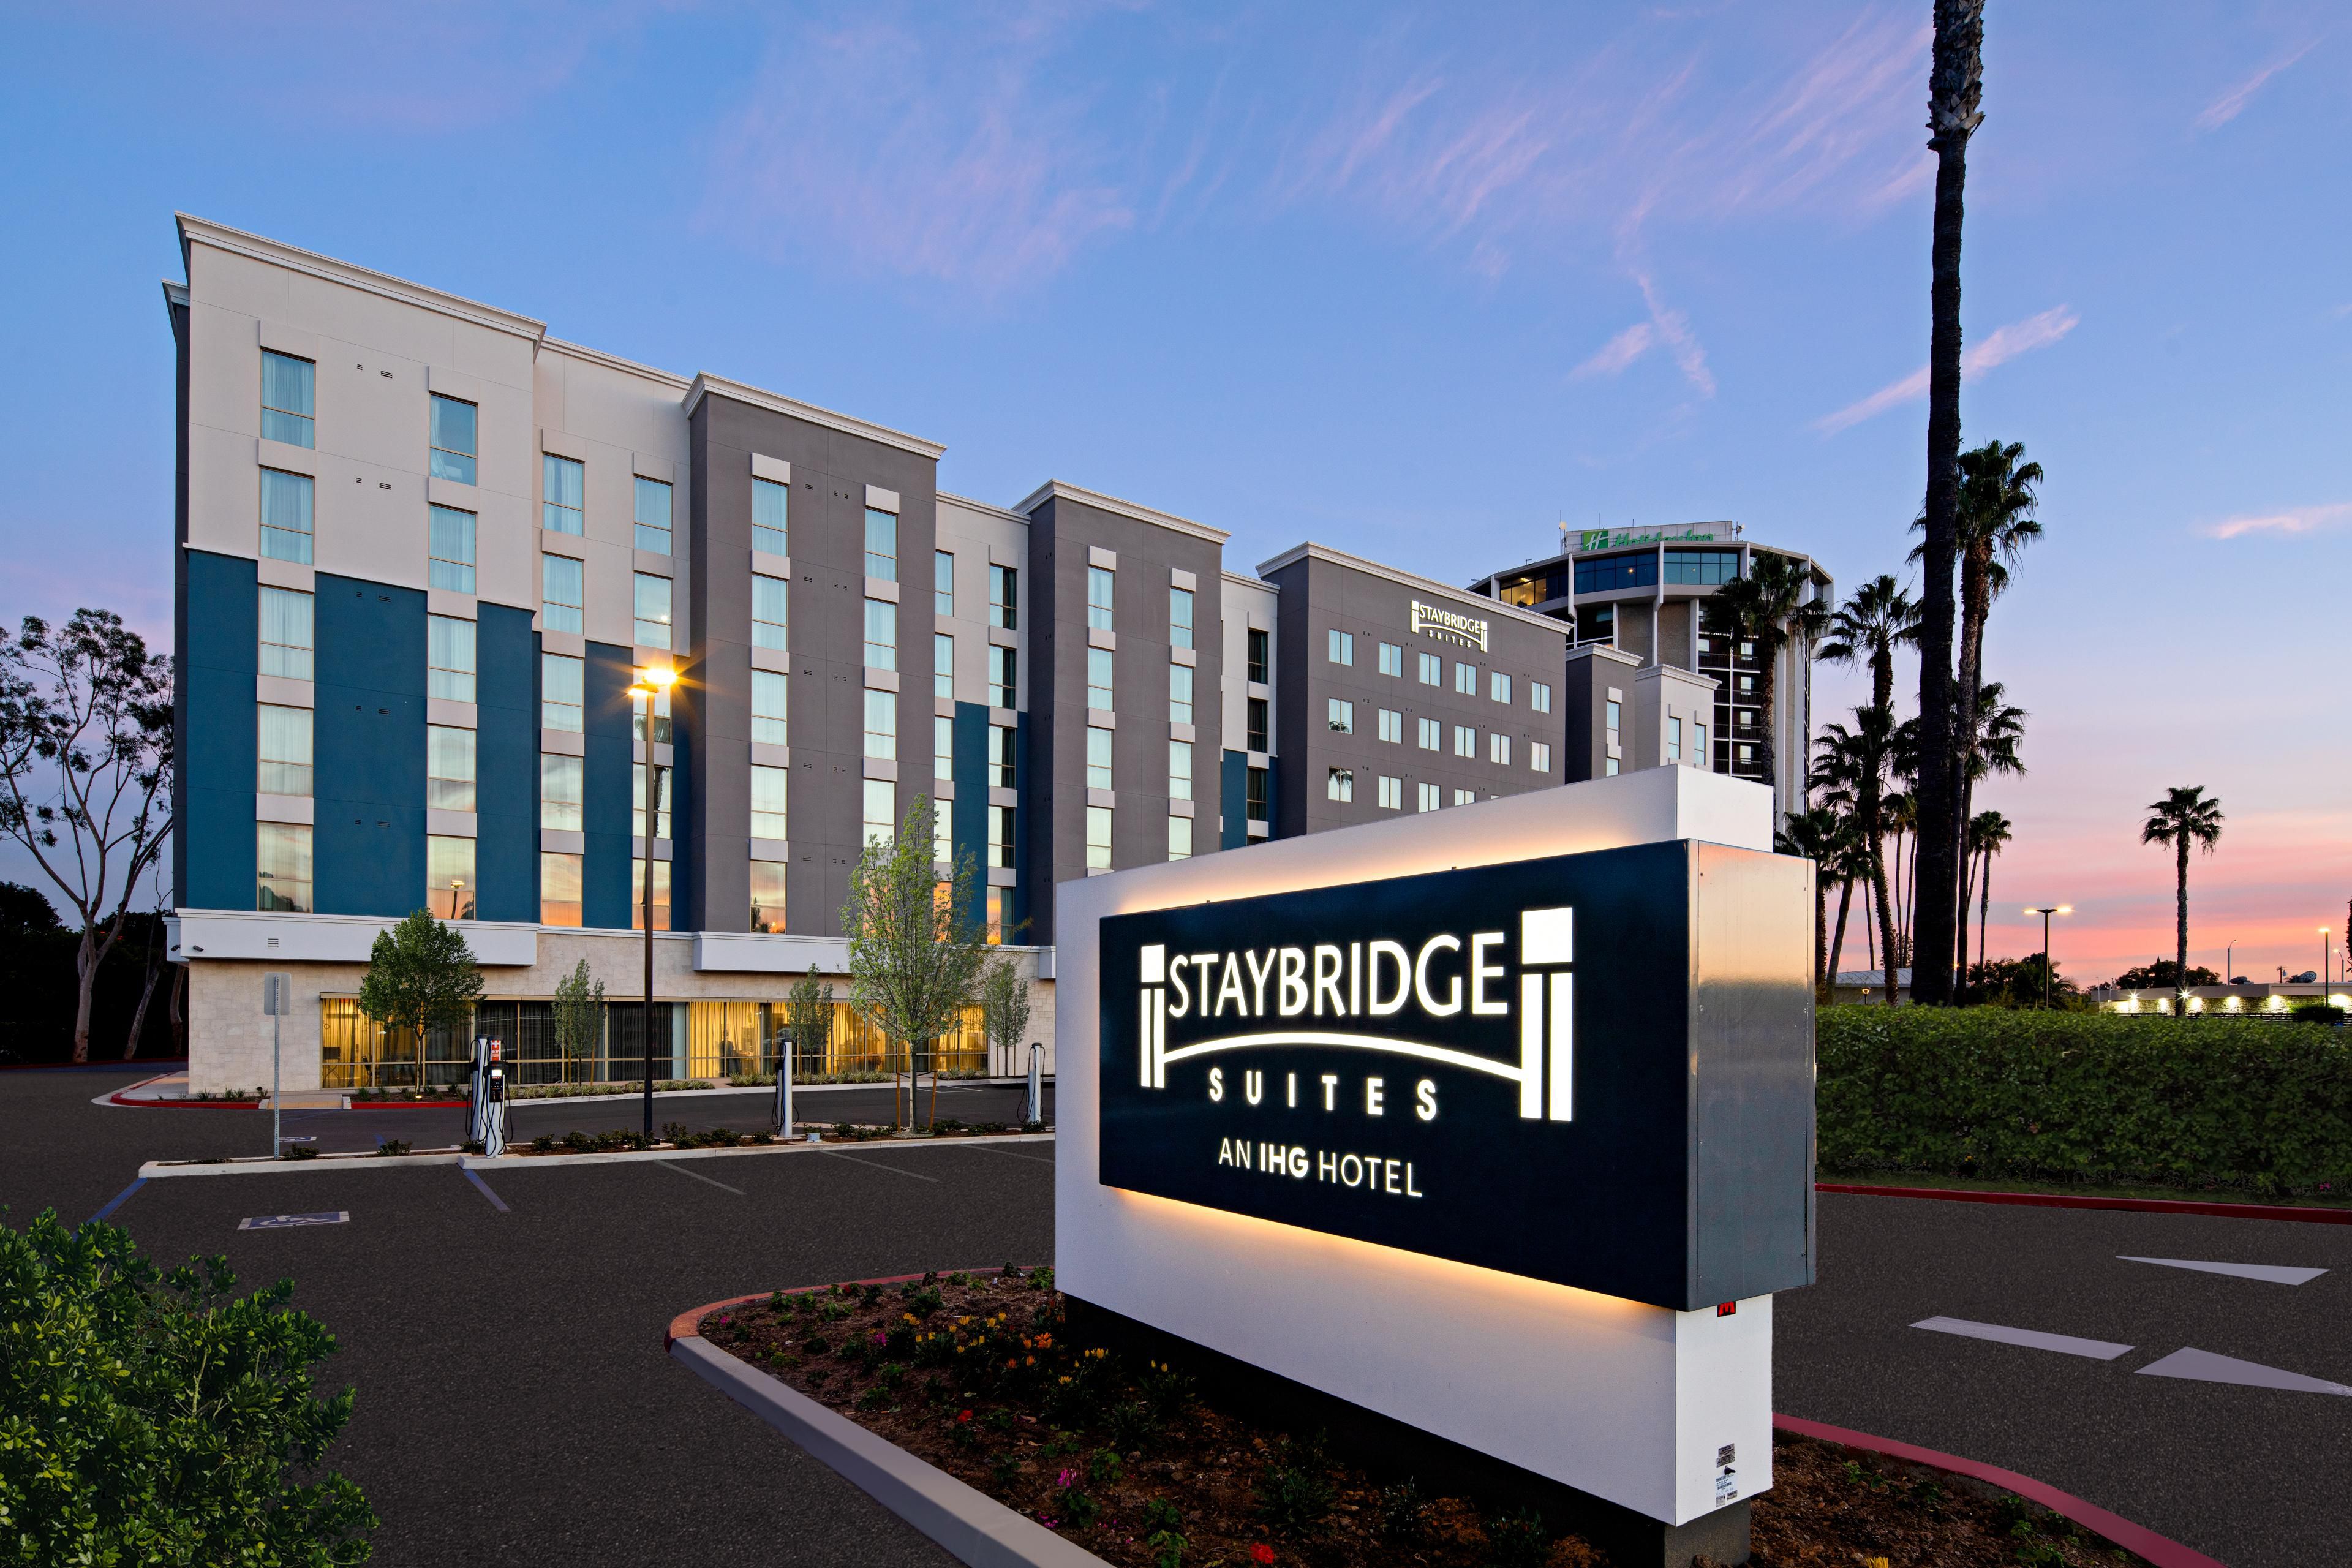 When it comes to travel, the Staybridge Suites Long Beach Airport has everything you need to thrive during your stay, including complimentary shuttle service to and from the Long Beach airport.